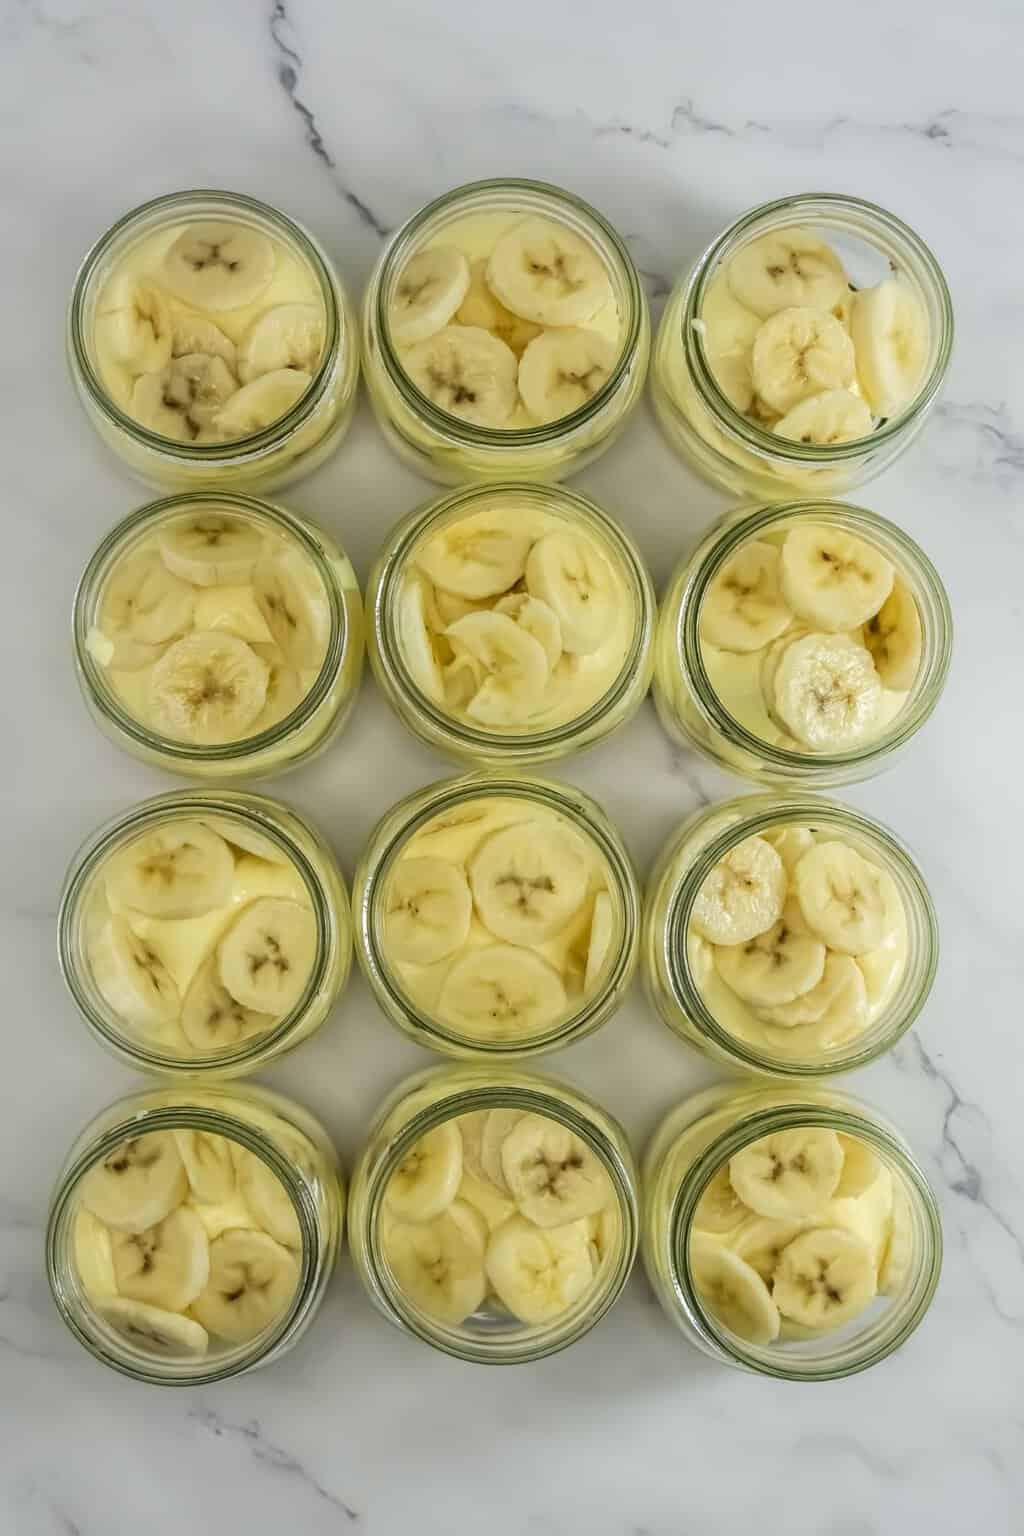 Topping pudding with banana slices.